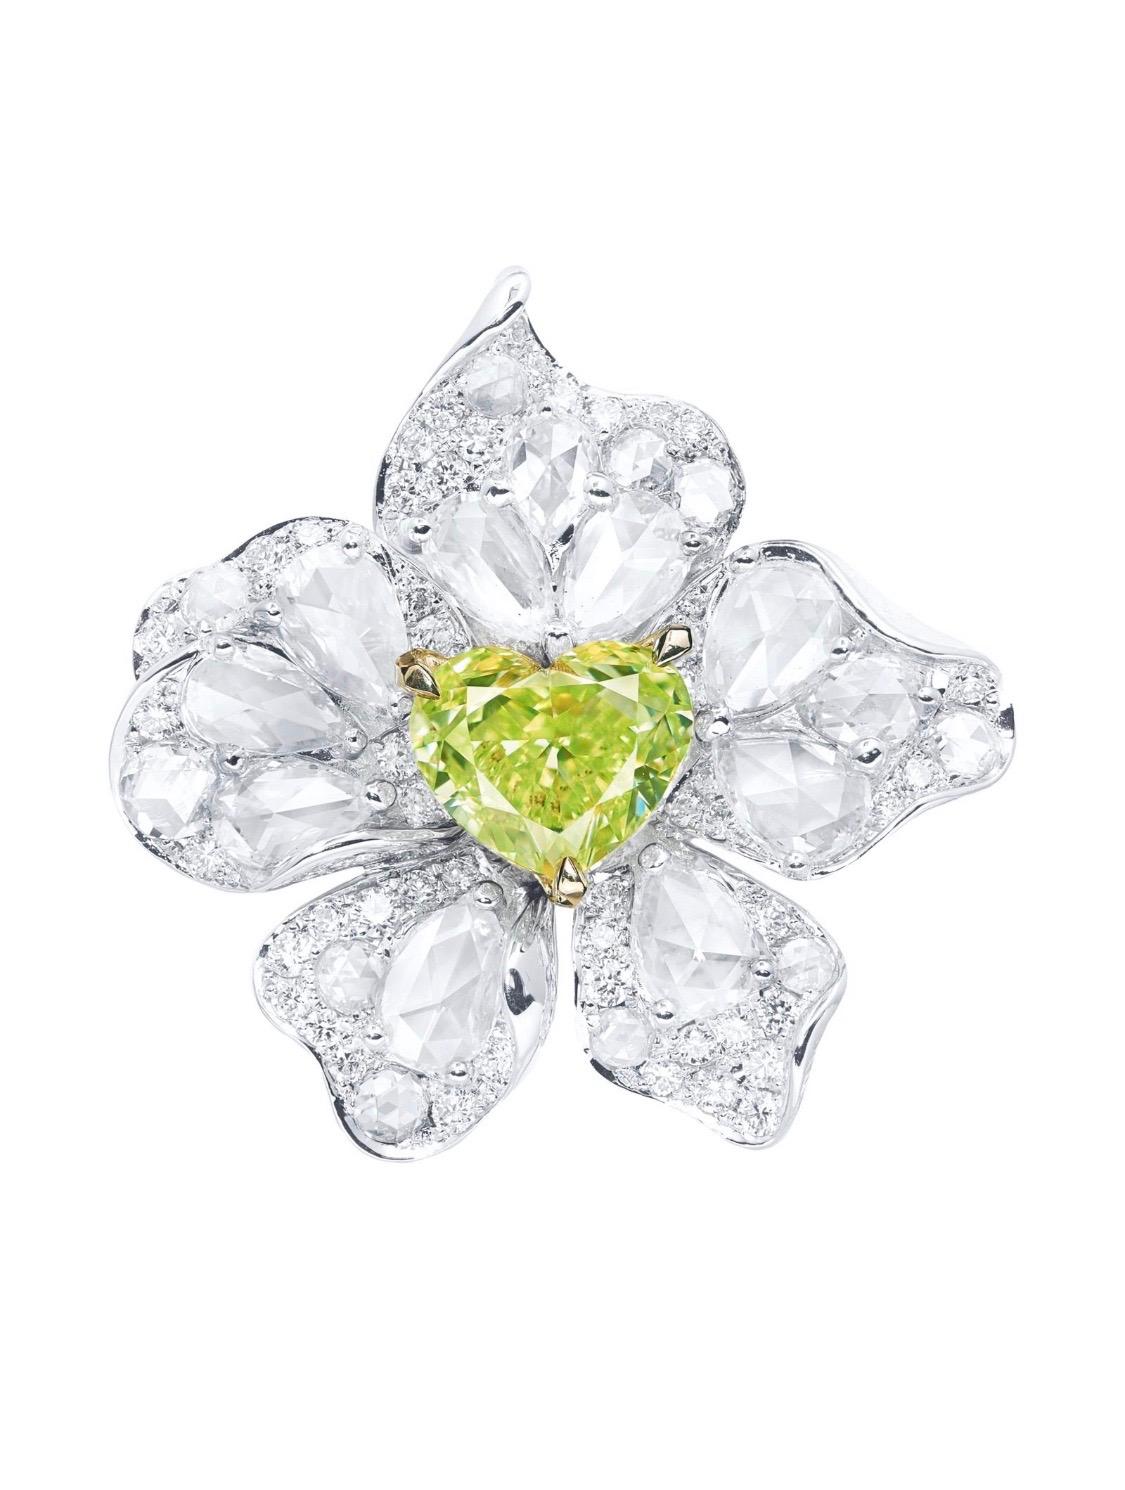 From the Emilio Jewelry Museum Vault, Showcasing a stunning certified 2.00 carat Gia certified natural fancy intense yellow green heart shape center. There are an additional 3.90 carats of white diamonds set in this custom created ring. 
We are